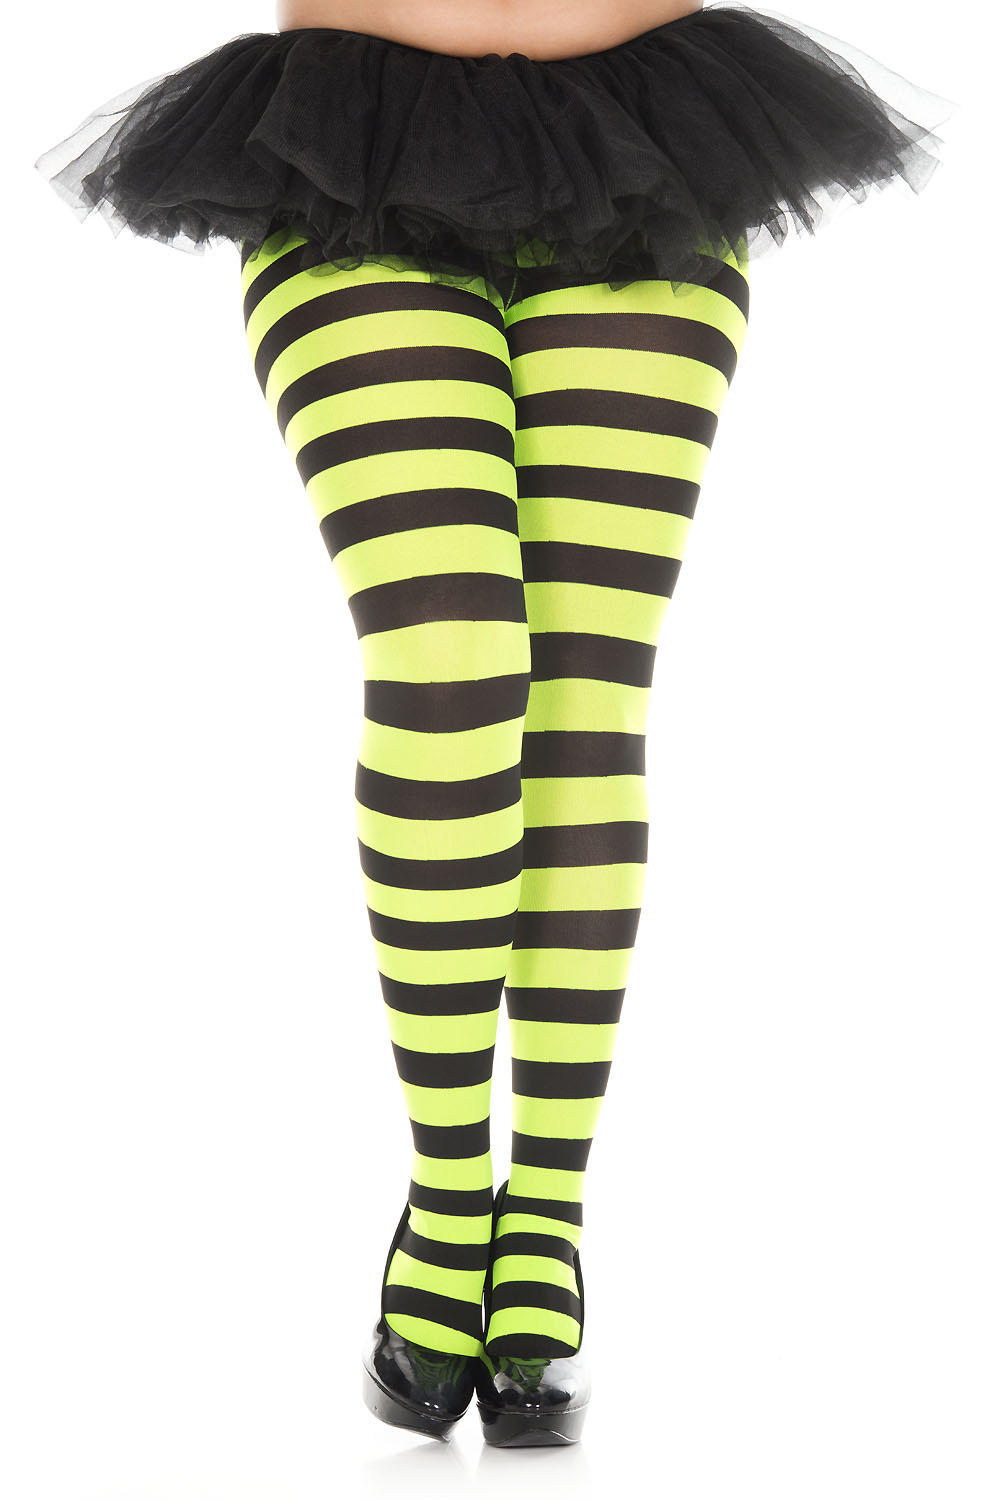 Adult Plus Size Black And Neon Green Wide Striped Women Tights